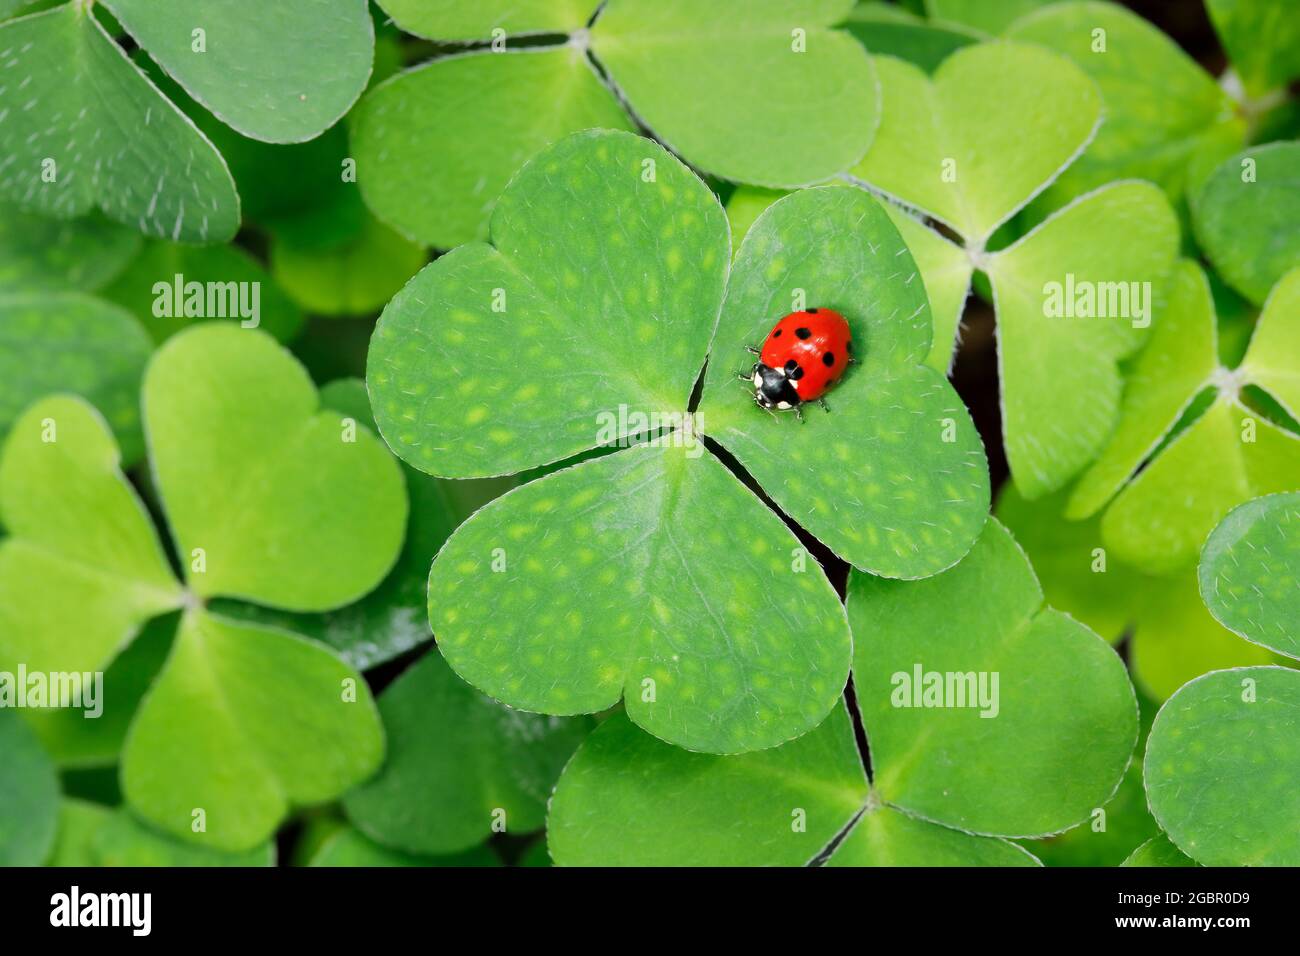 zoology, insects (Insecta), seven-spotted lady beetle on clover, Switzerland, NO-EXCLUSIVE-USE FOR FOLDING-CARD-GREETING-CARD-POSTCARD-USE Stock Photo